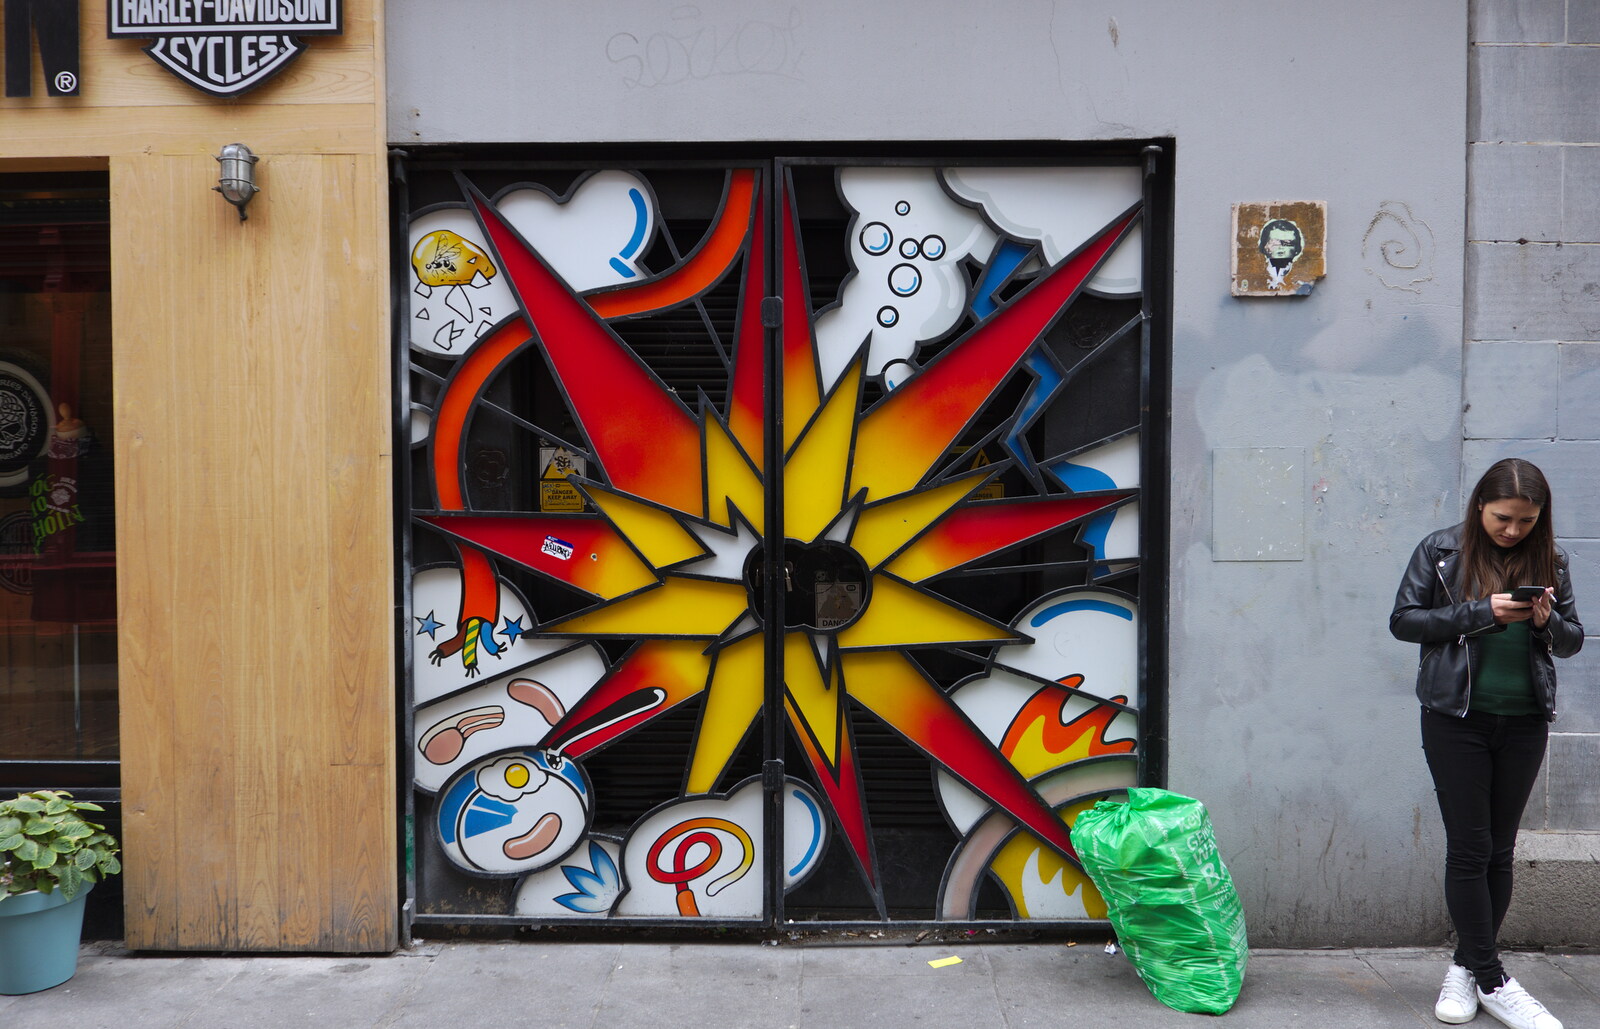 Funky stained-glass door from Busking in Temple Bar, Dublin, Ireland - 12th August 2019